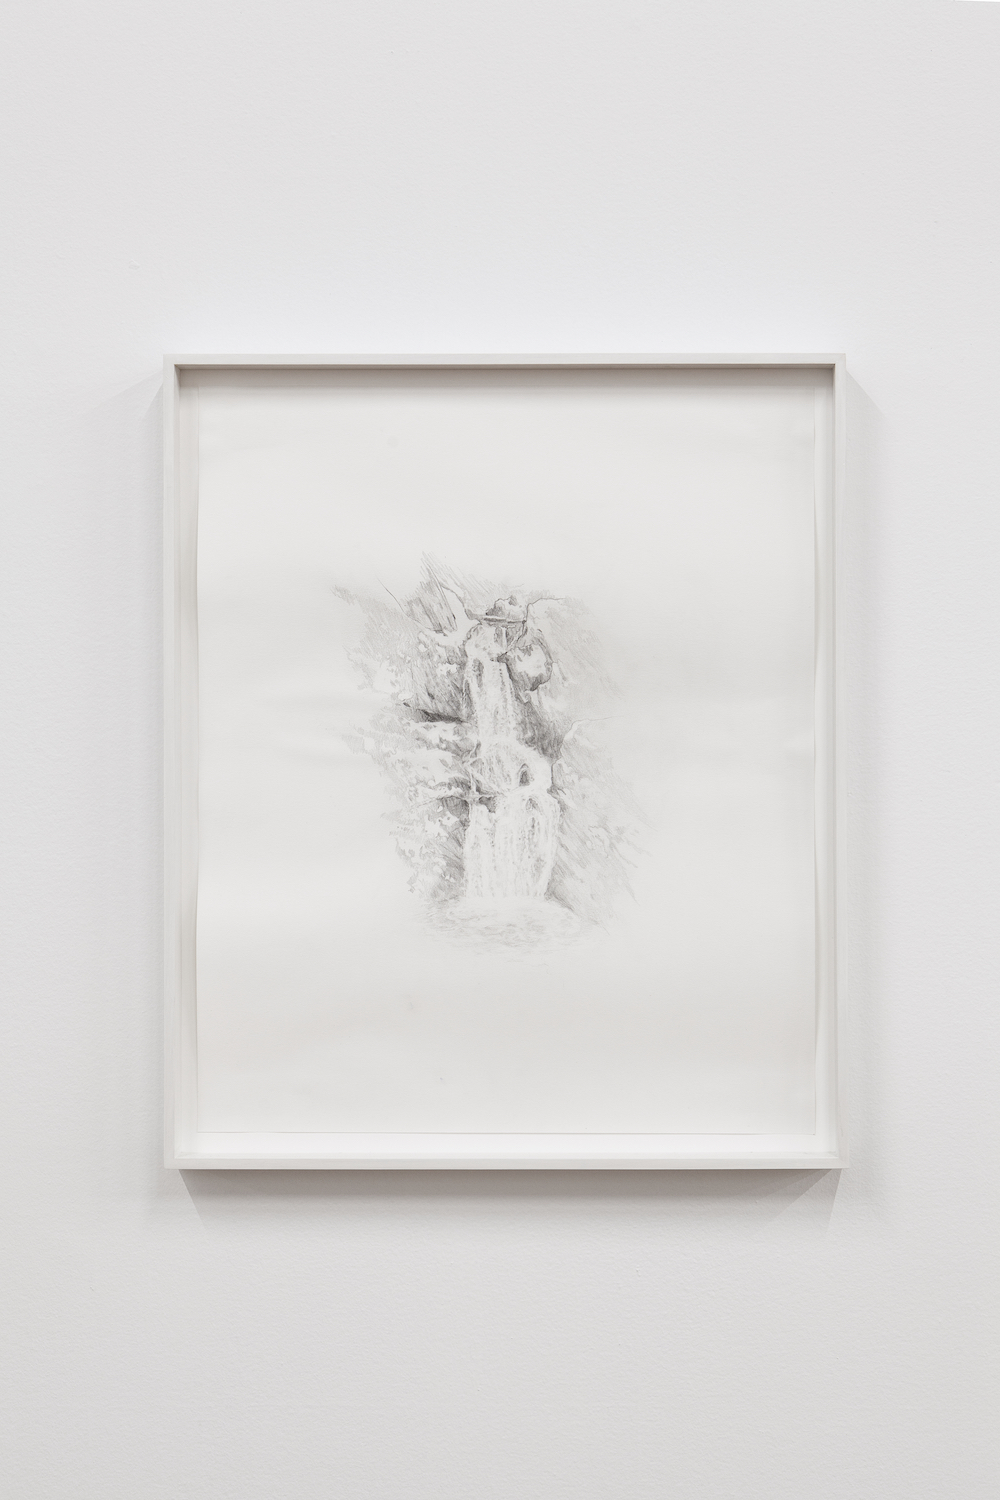 Nash Glynn, *a late winter waterfall*, 2018. Graphite on paper